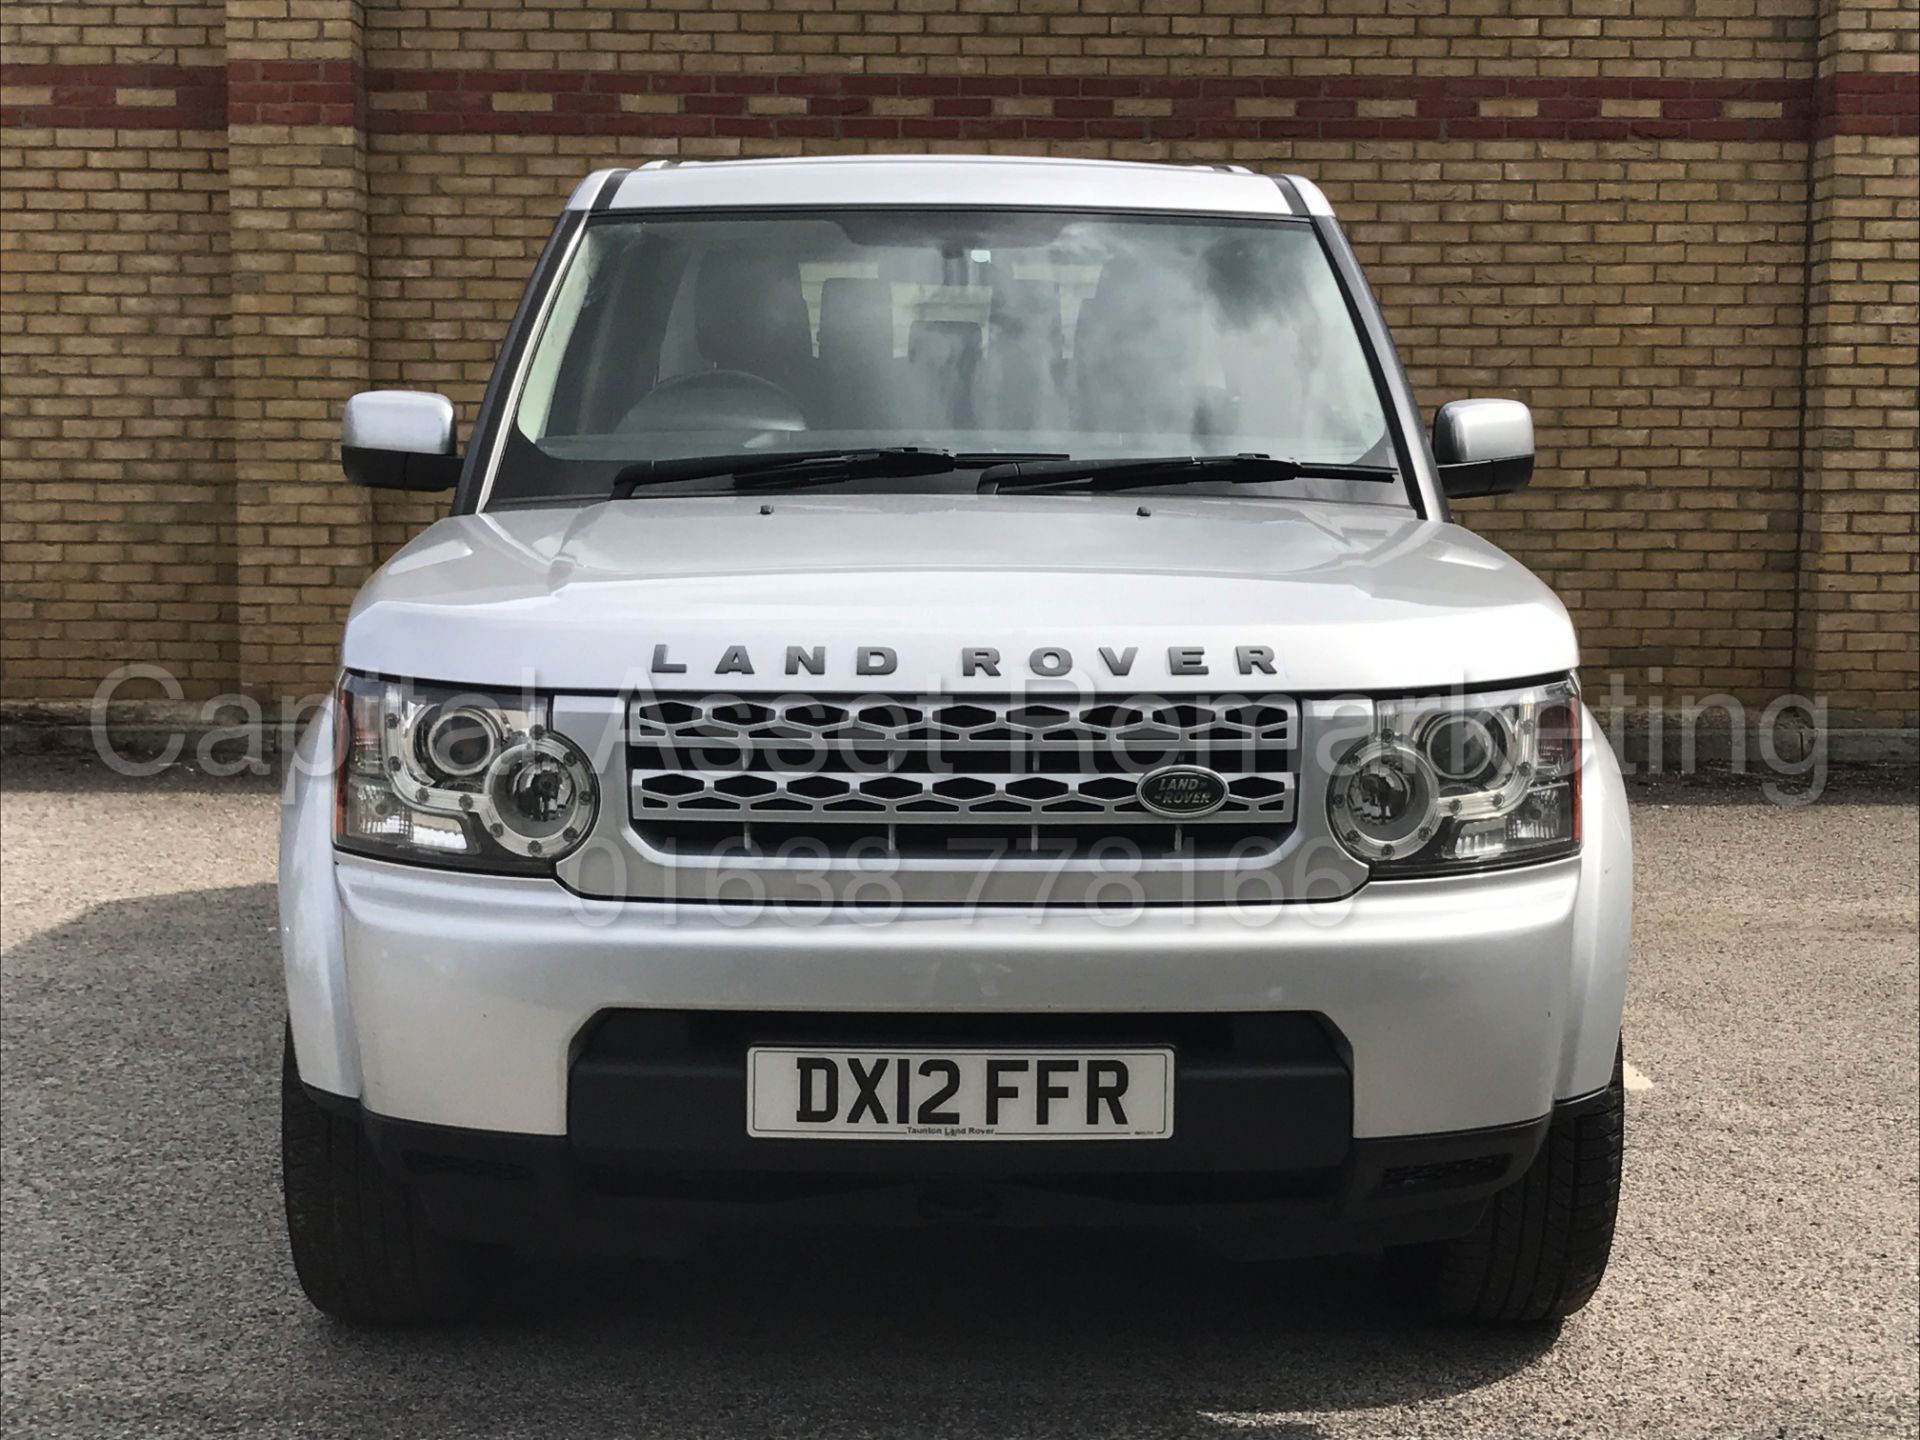 (On Sale) LAND ROVER DISCOVERY 4 (2012) '3.0 SDV6 - 8 SPEED AUTO - 7 SEATER' **HUGE SPEC** (1 OWNER) - Image 3 of 33